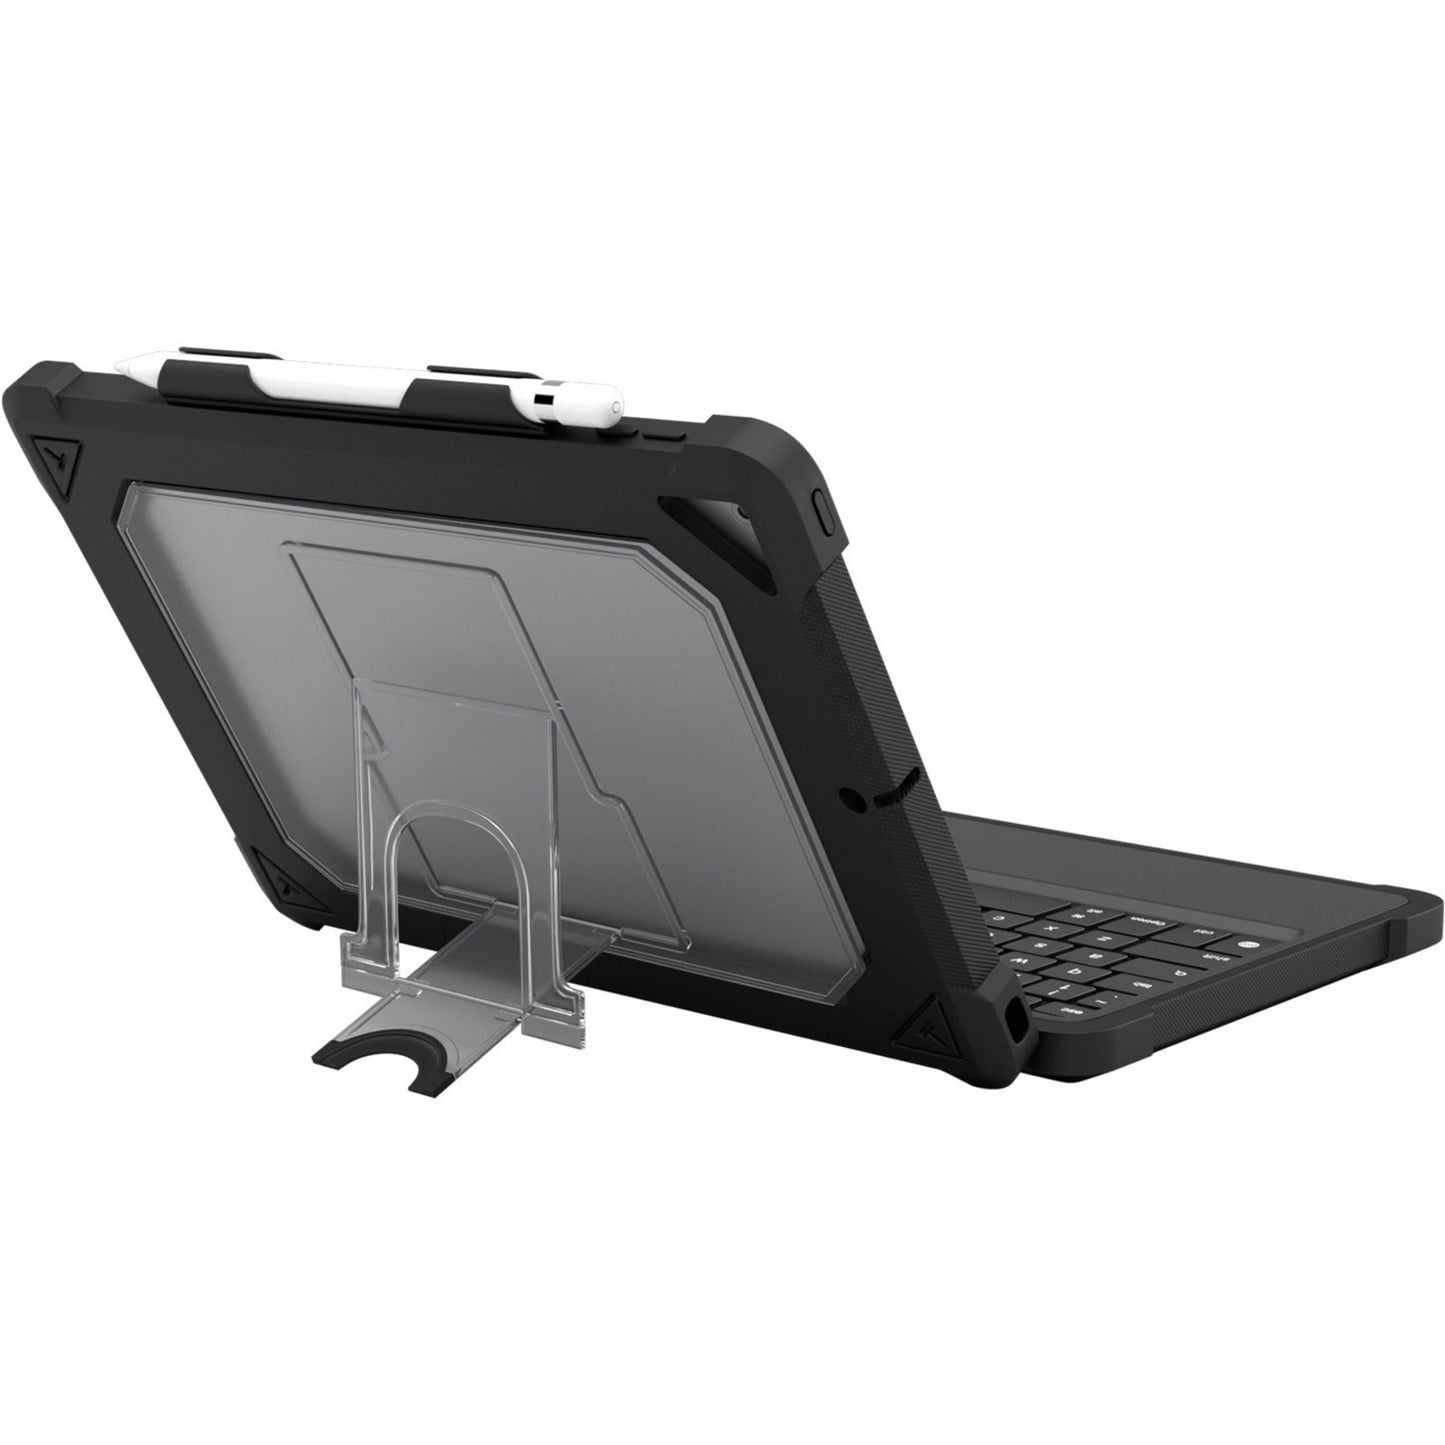 MAXCases Extreme KeyCase-X Rugged Keyboard/Cover Case for 10.2" Apple iPad (7th Generation) iPad (8th Generation) iPad (9th Generation) Tablet - Clear